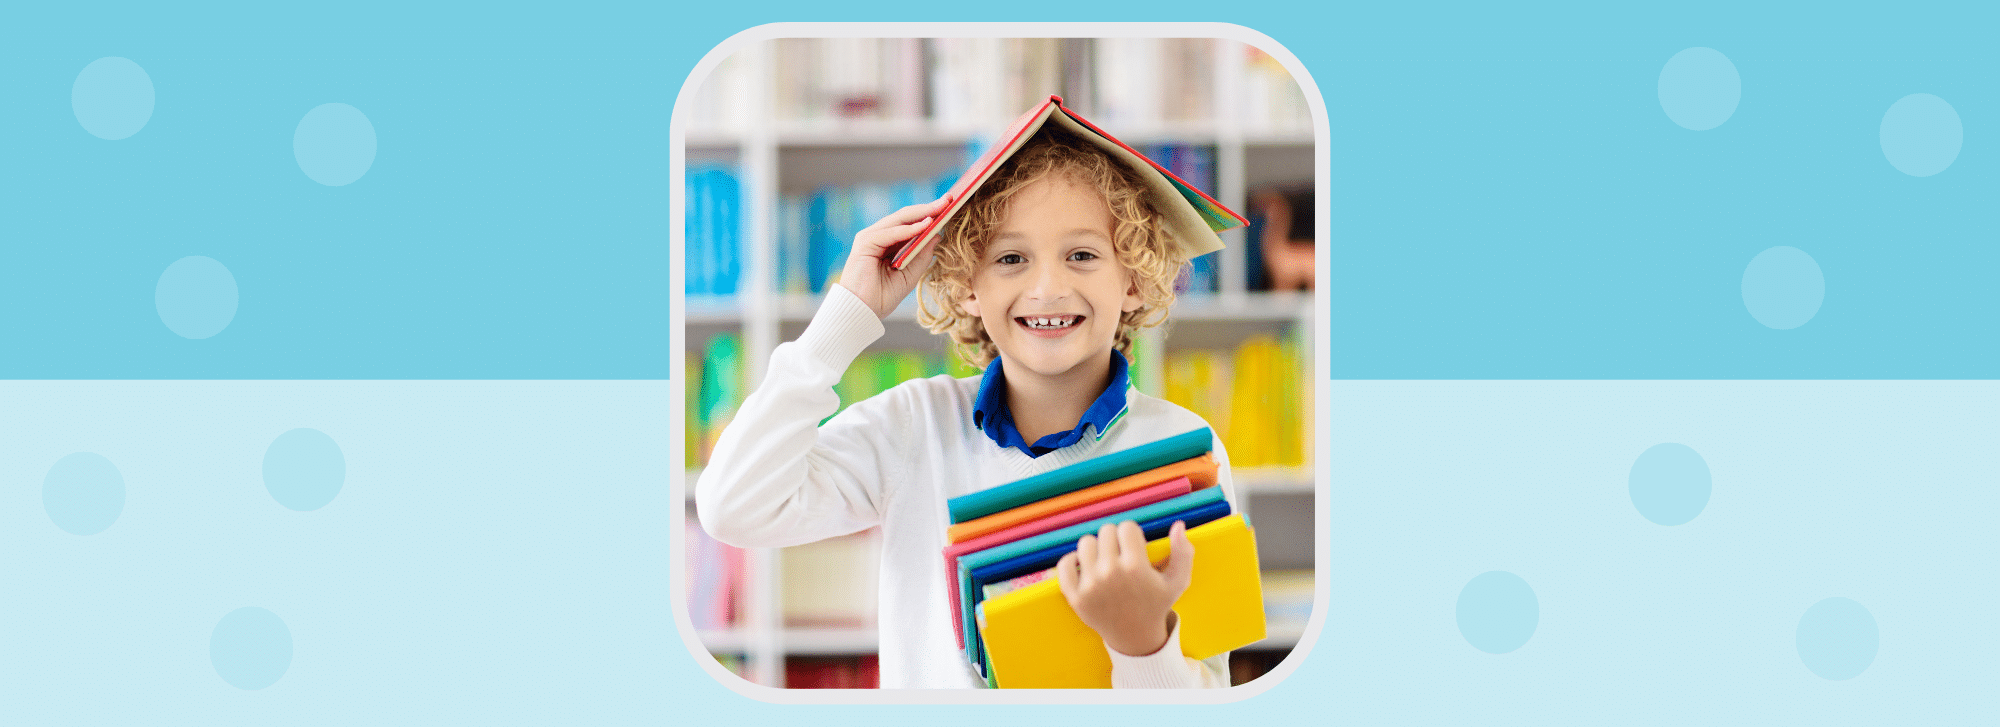 image showing a young boy holding some books in his hands and one book on his head